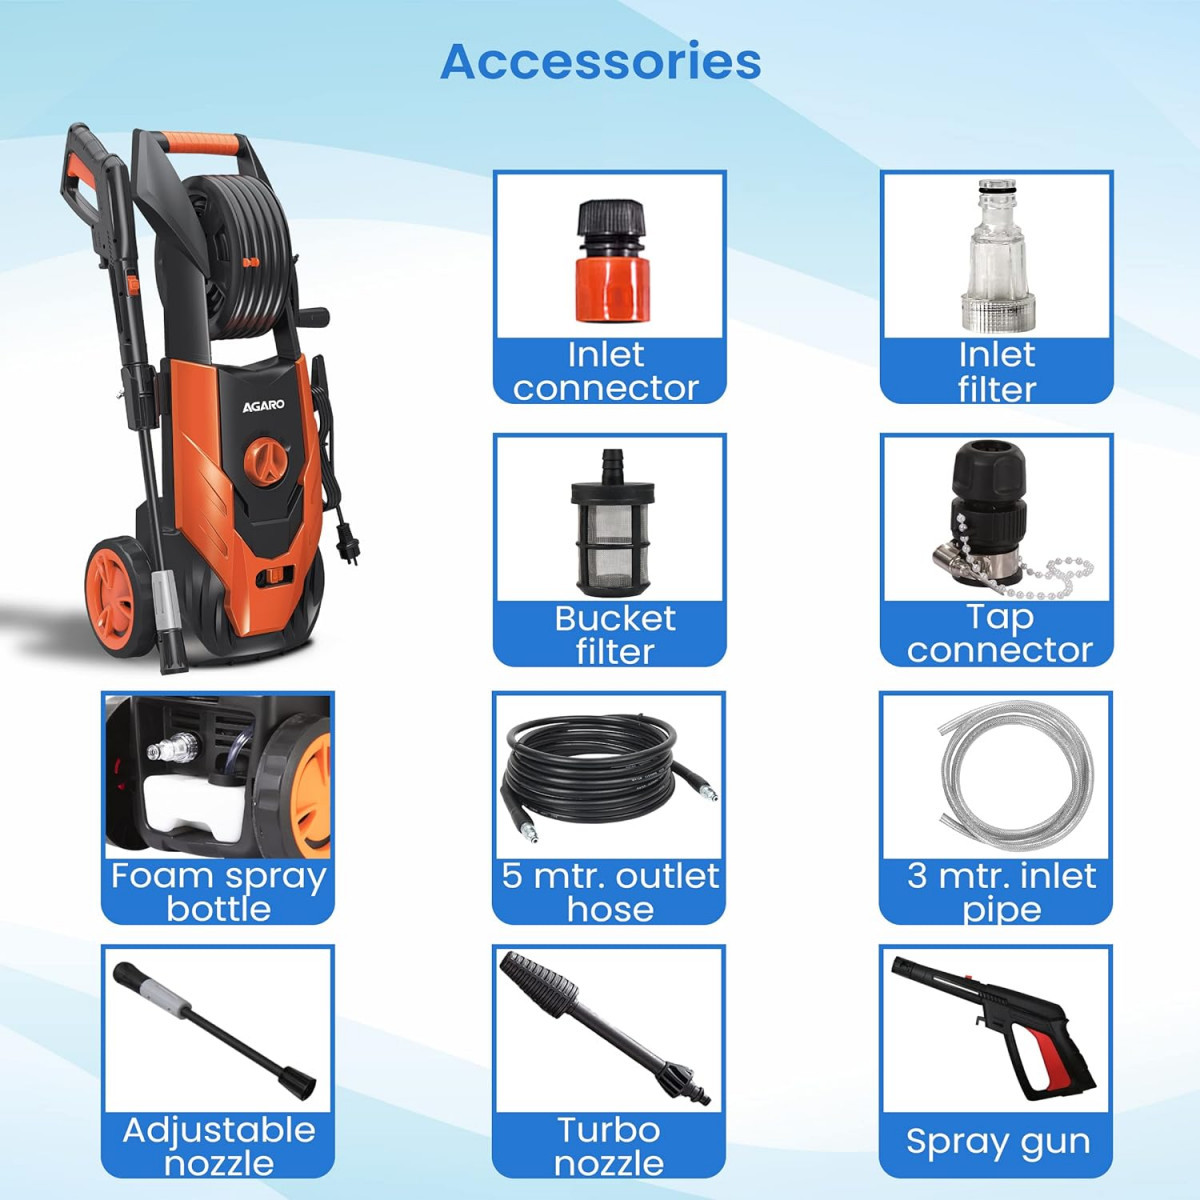 AGARO Royal High Pressure washer 1800 Watts Motor 140 Bars 7LMin Flow Rate 5 Meters Outlet Hose Upright Design With Wheel For Car Bike and Home Cleaning Purpose Turbo Nozzle Black and Orange